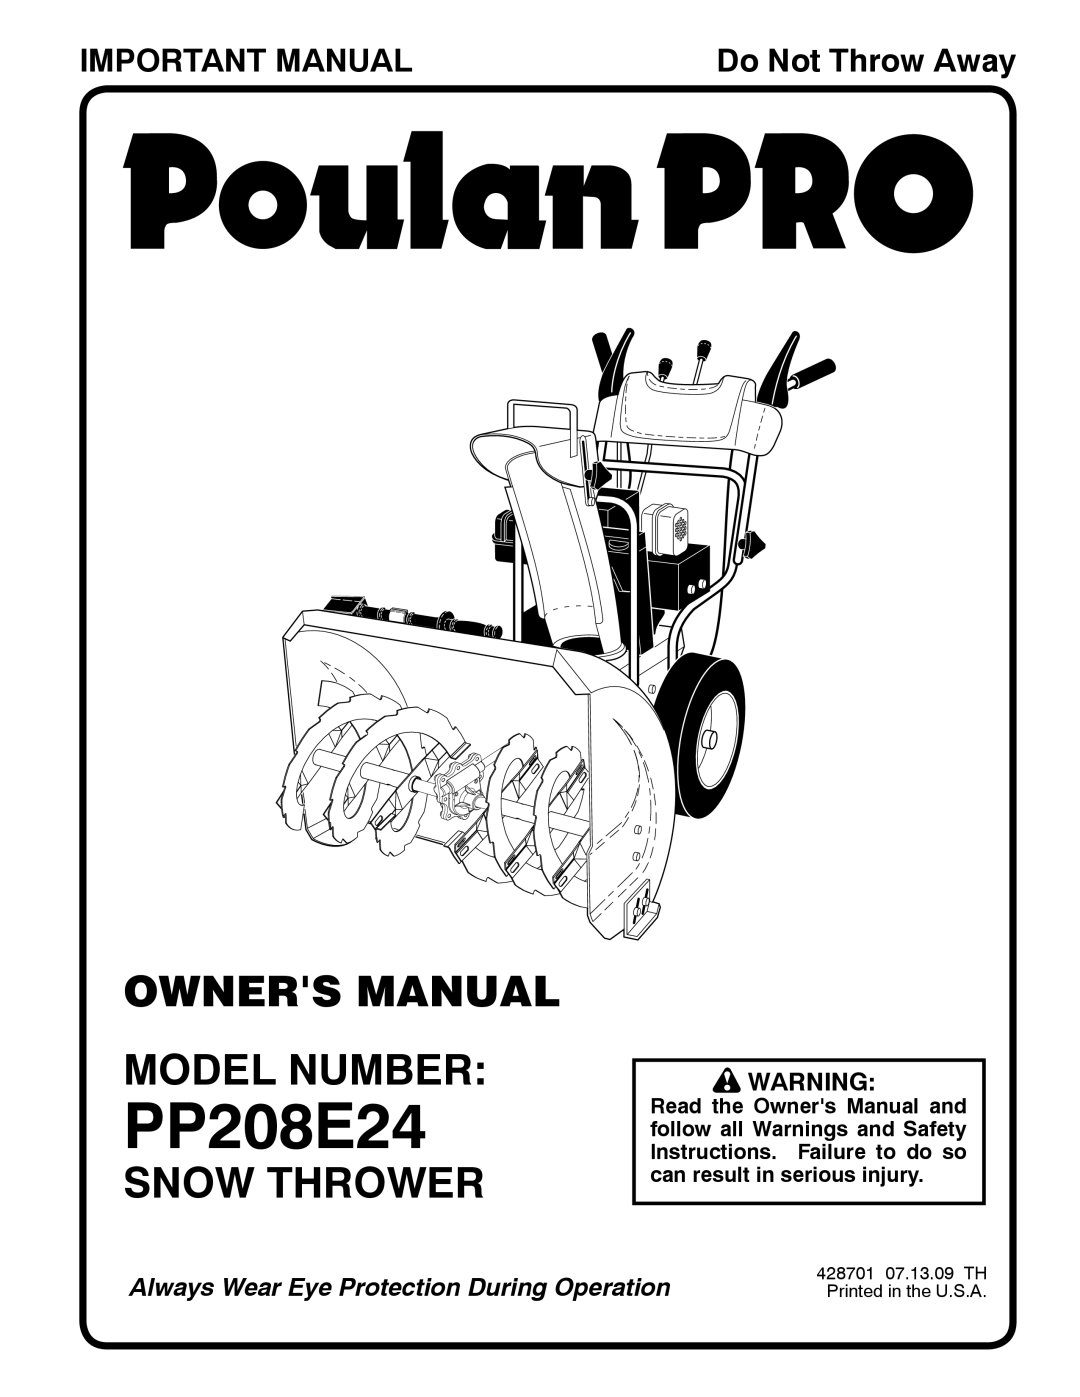 Poulan 96198002601 owner manual Owners Manual Model Number, Snow Thrower, Important Manual, PP208E24, Do Not Throw Away 